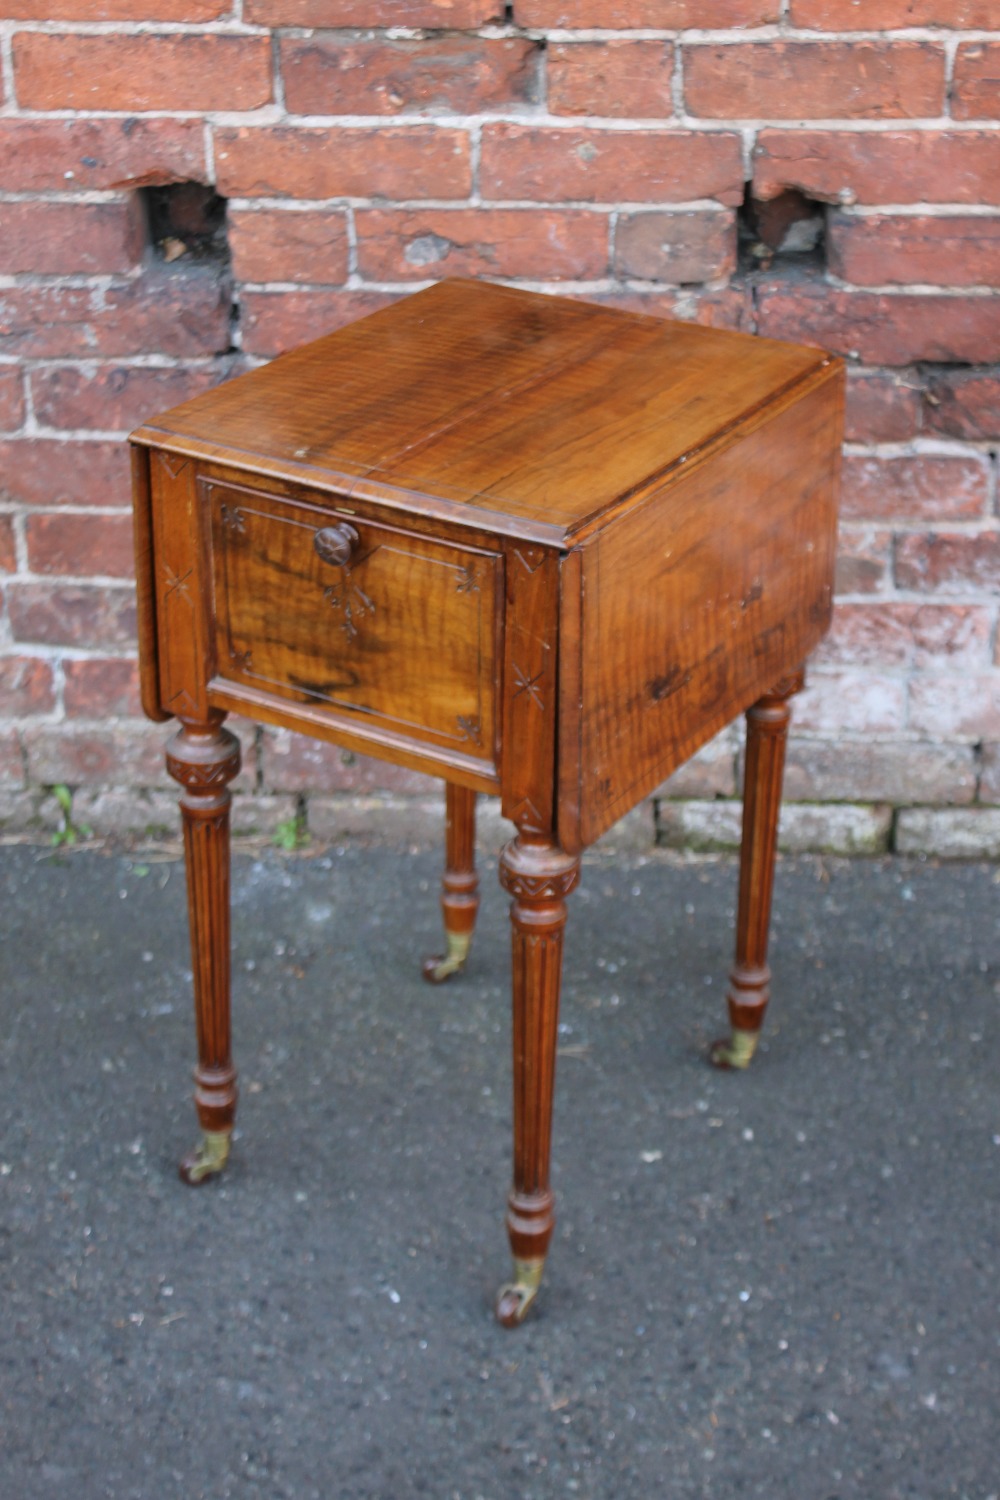 A 19TH CENTURY MAHOGANY SMALL DROPLEAF SIDE TABLE, the top with incised detail, fall front - Image 2 of 6